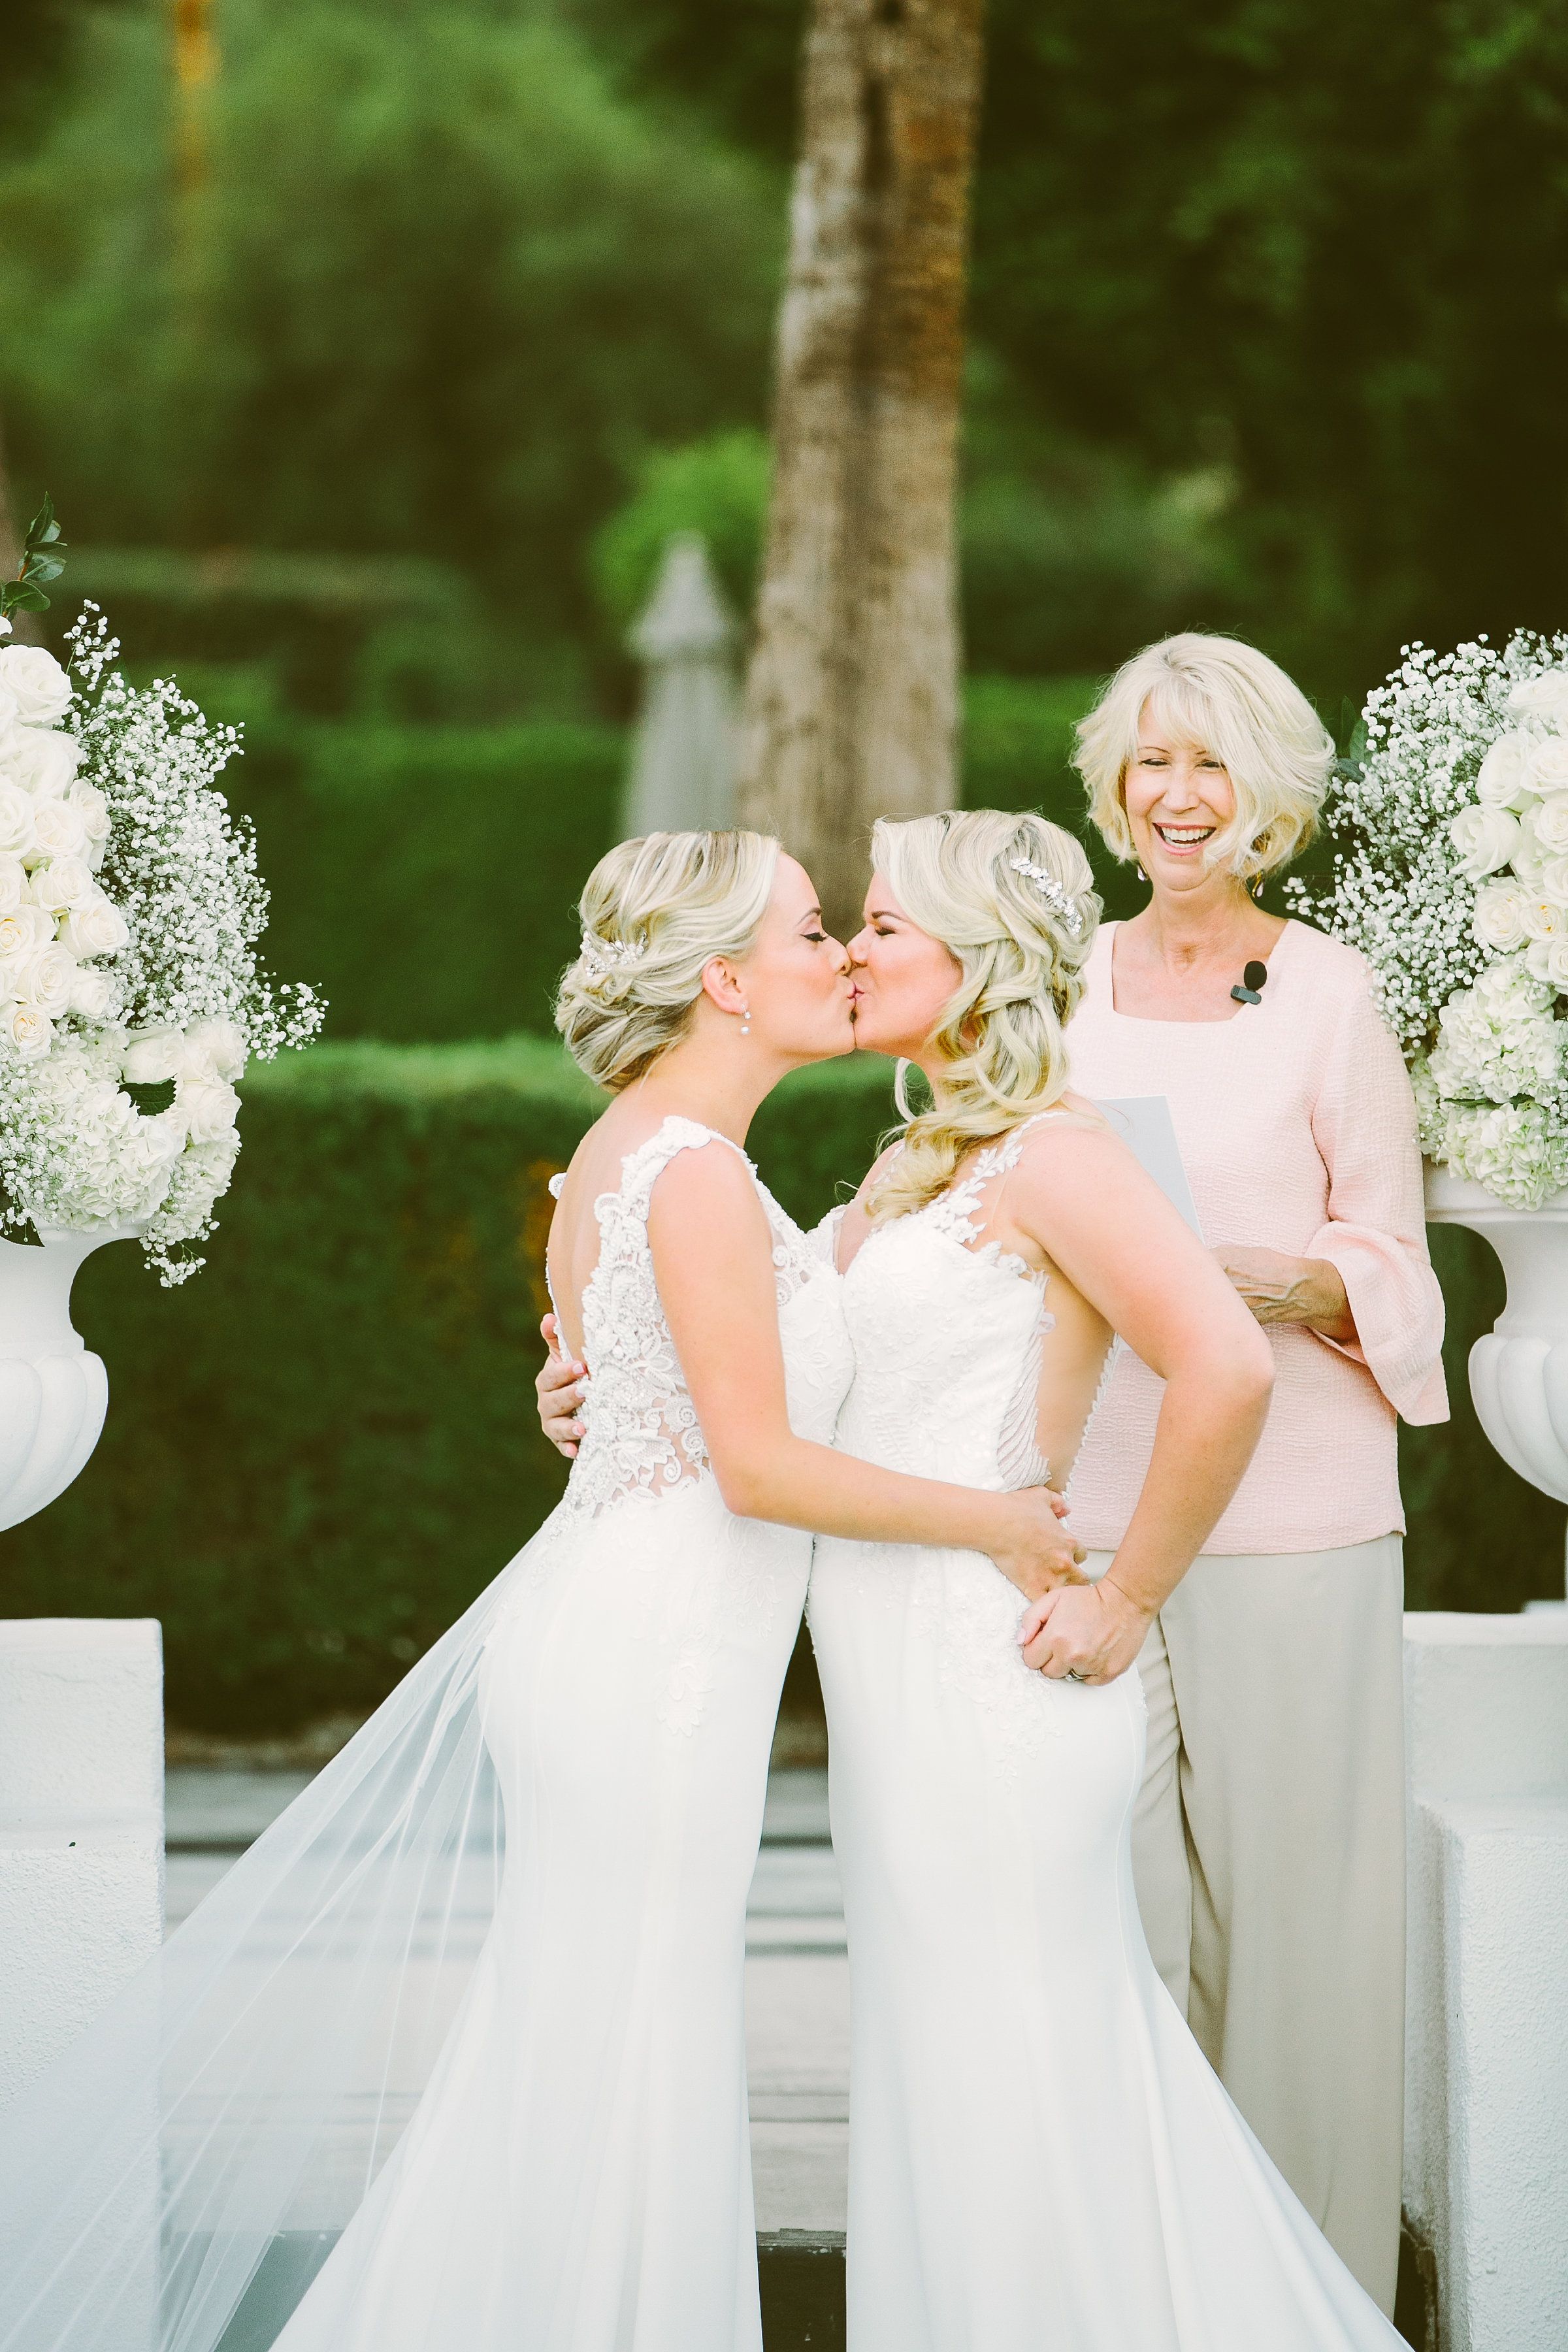 Lesbian wedding planning advice and tips